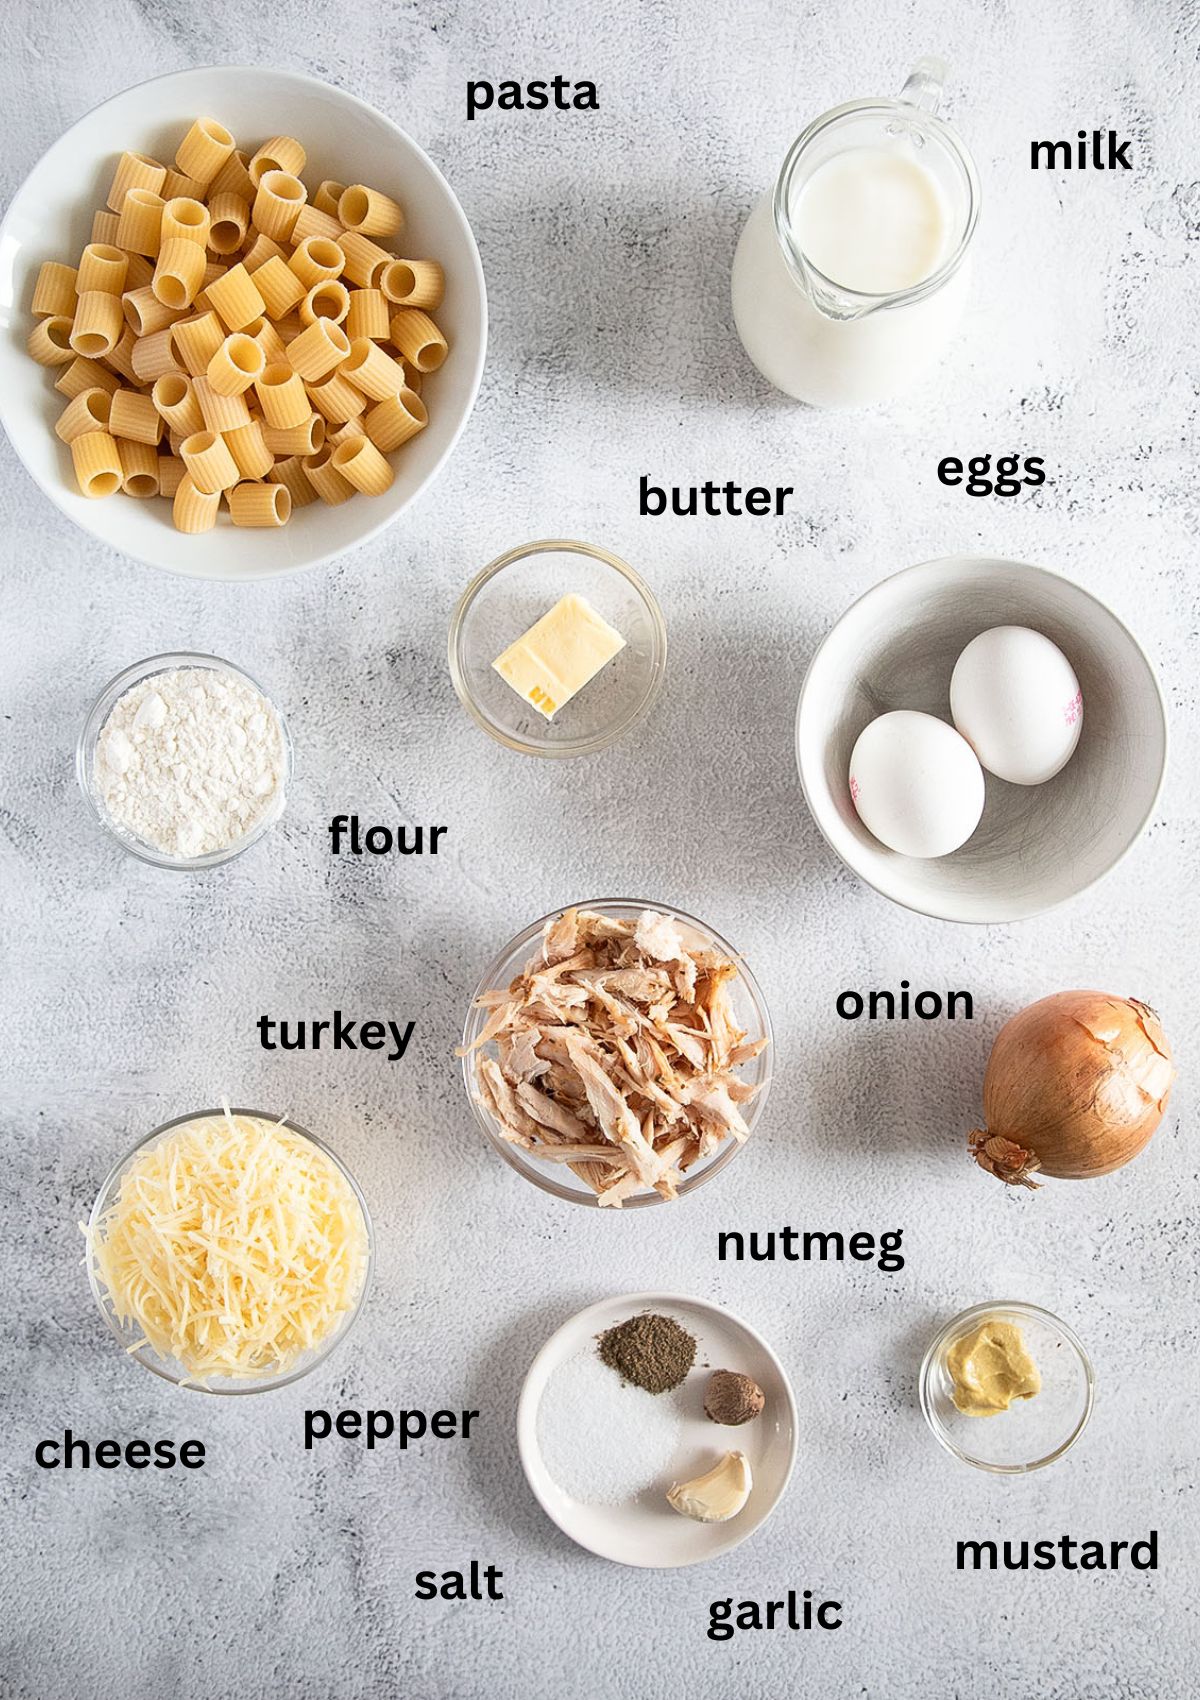 listed ingredients for making a casserole with turkey, pasta, eggs, cheese and white sauce.